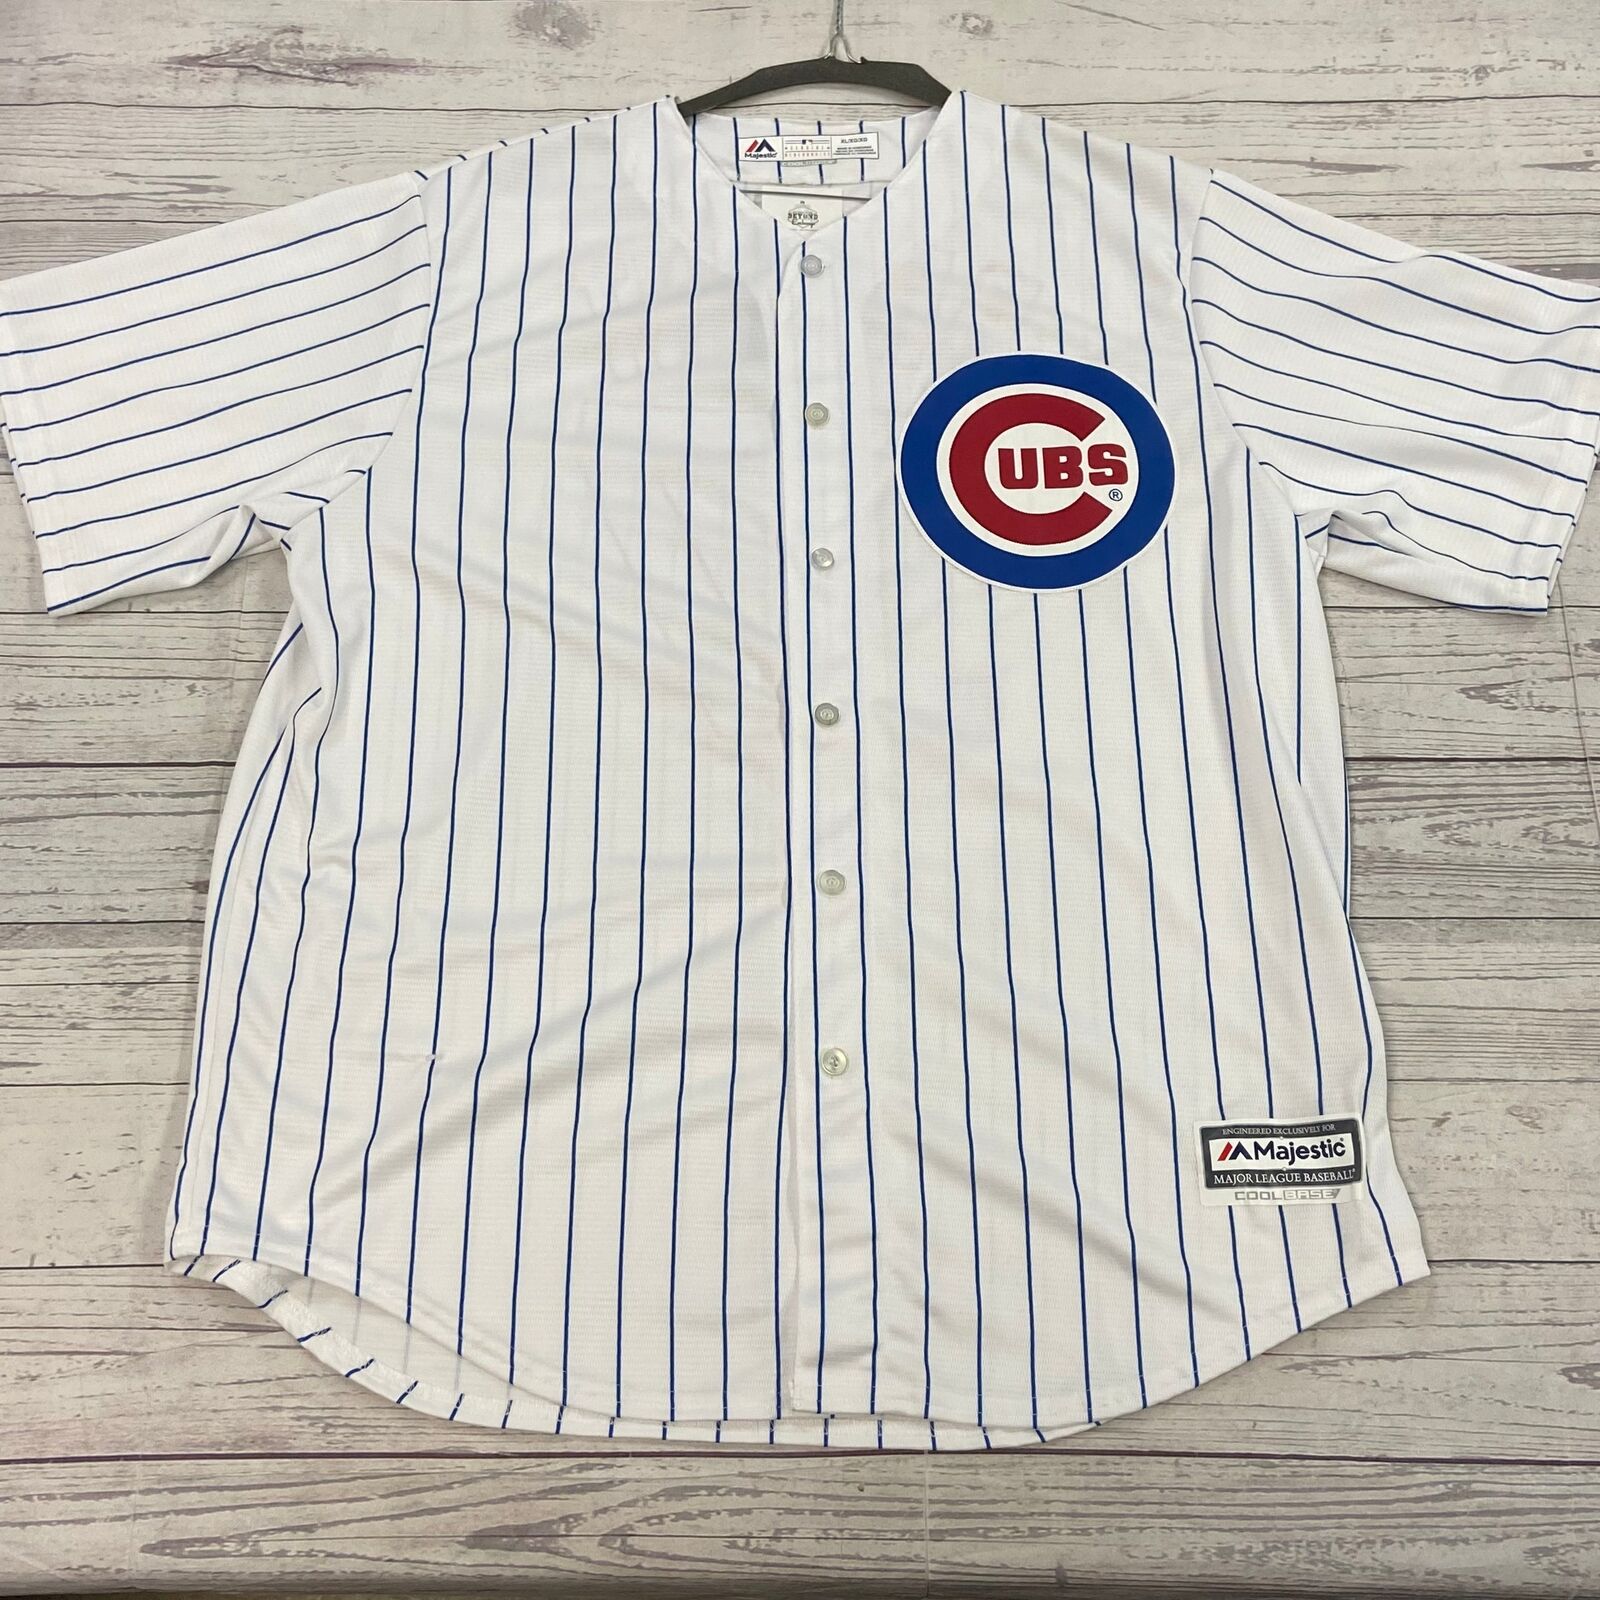 all white cubs jersey